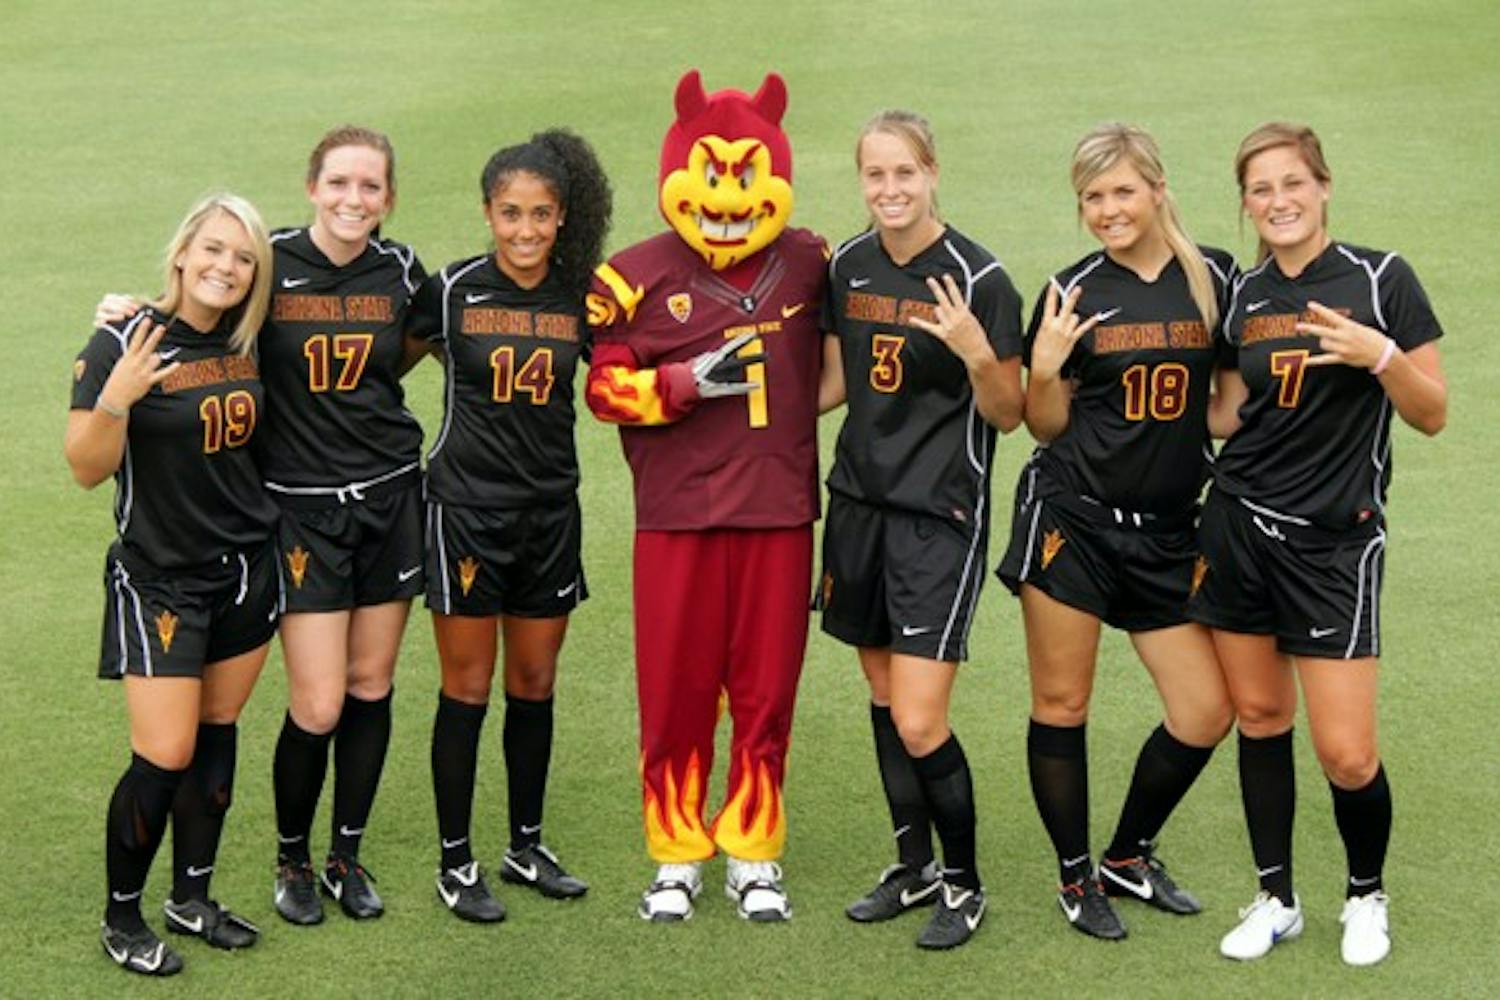 LAST STAND: ASU senior soccer players (from left to right) Kari Shane, Kate Sangster, Nicole Acosta, Sierra Cook and redshirt juniors Courtney Giovanni and Courtney Tinnin pose with Sparky before a game. All but Tinnin will play their final games as Sun Devils on Friday against UA. (Photo by Beth Easterbrook)